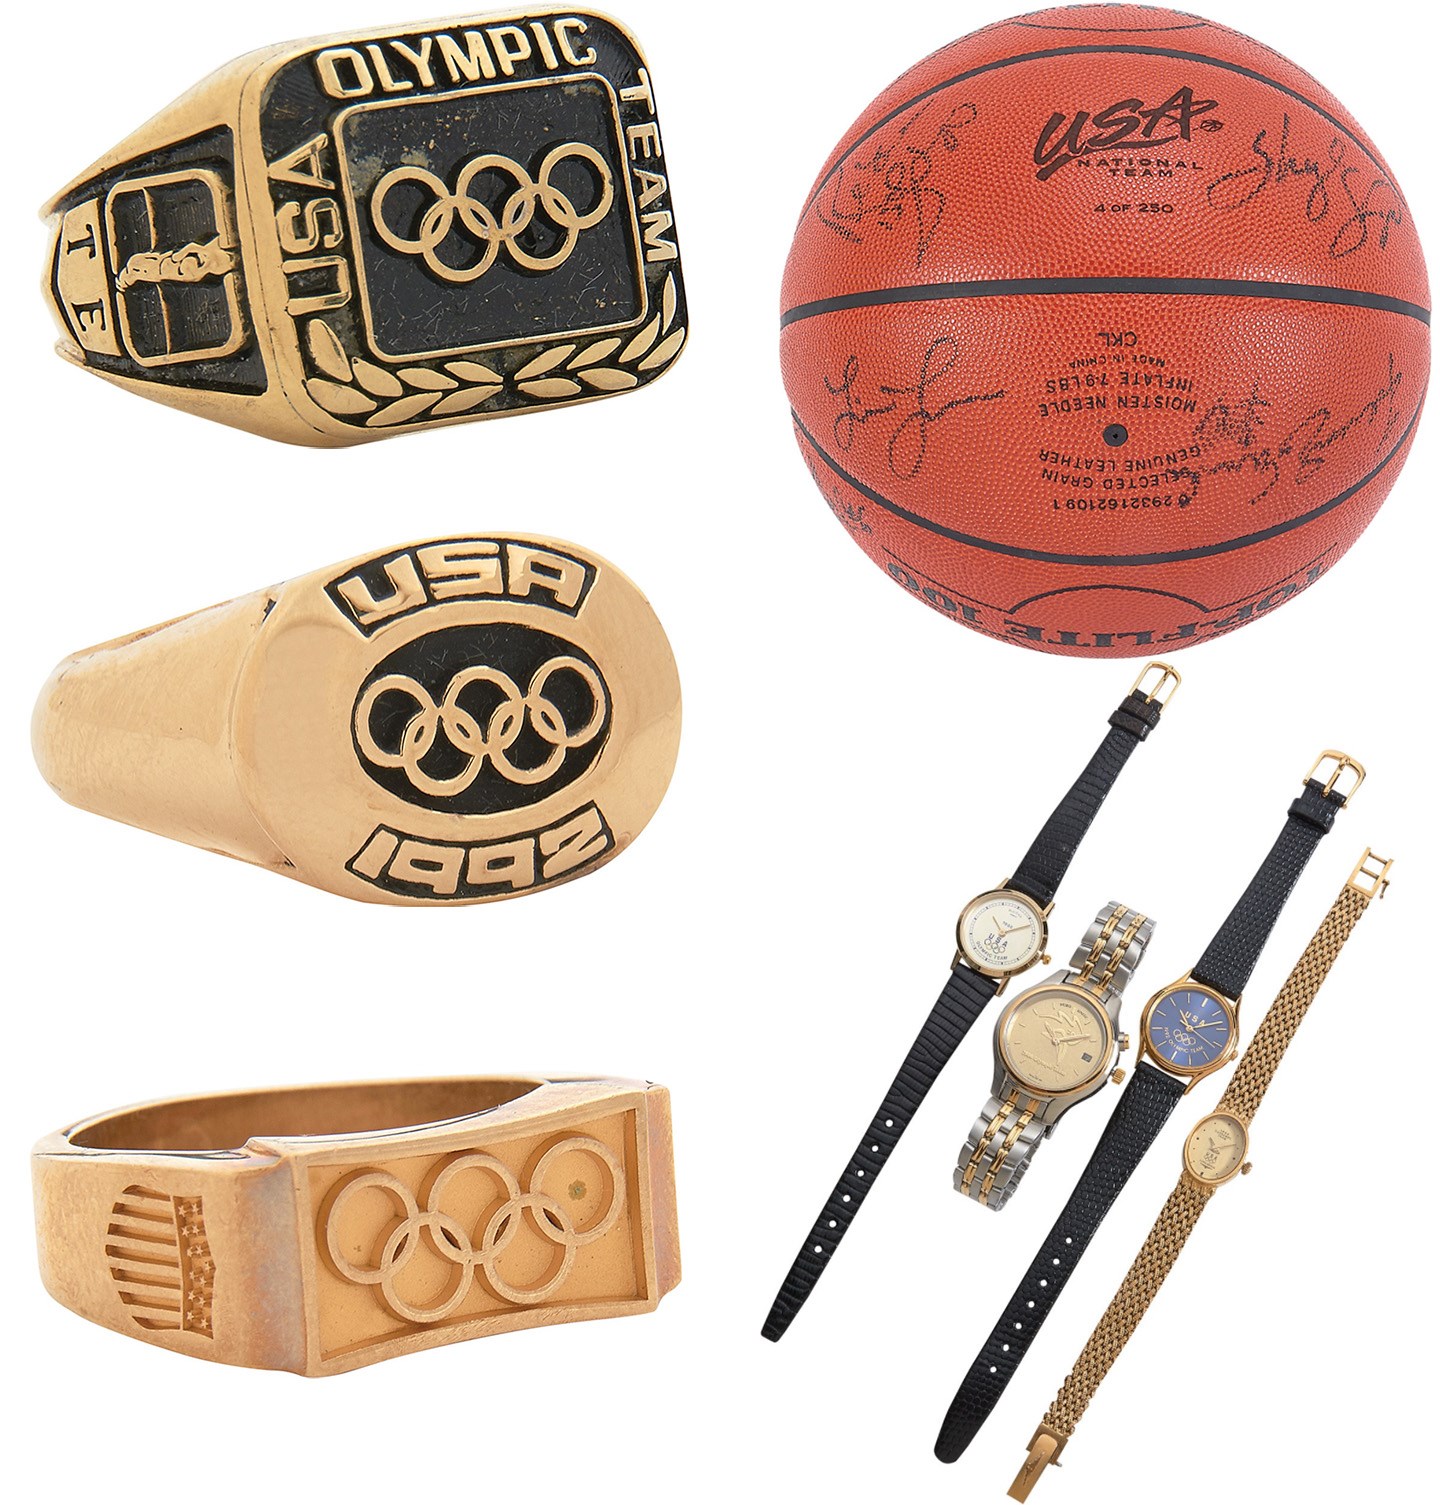 The Teresa Edwards Collection - Teresa Edwards USA Basketball Olympic Watches, Team-Signed Basketball & Presentation Rings (Four-Time Gold-Medalist)